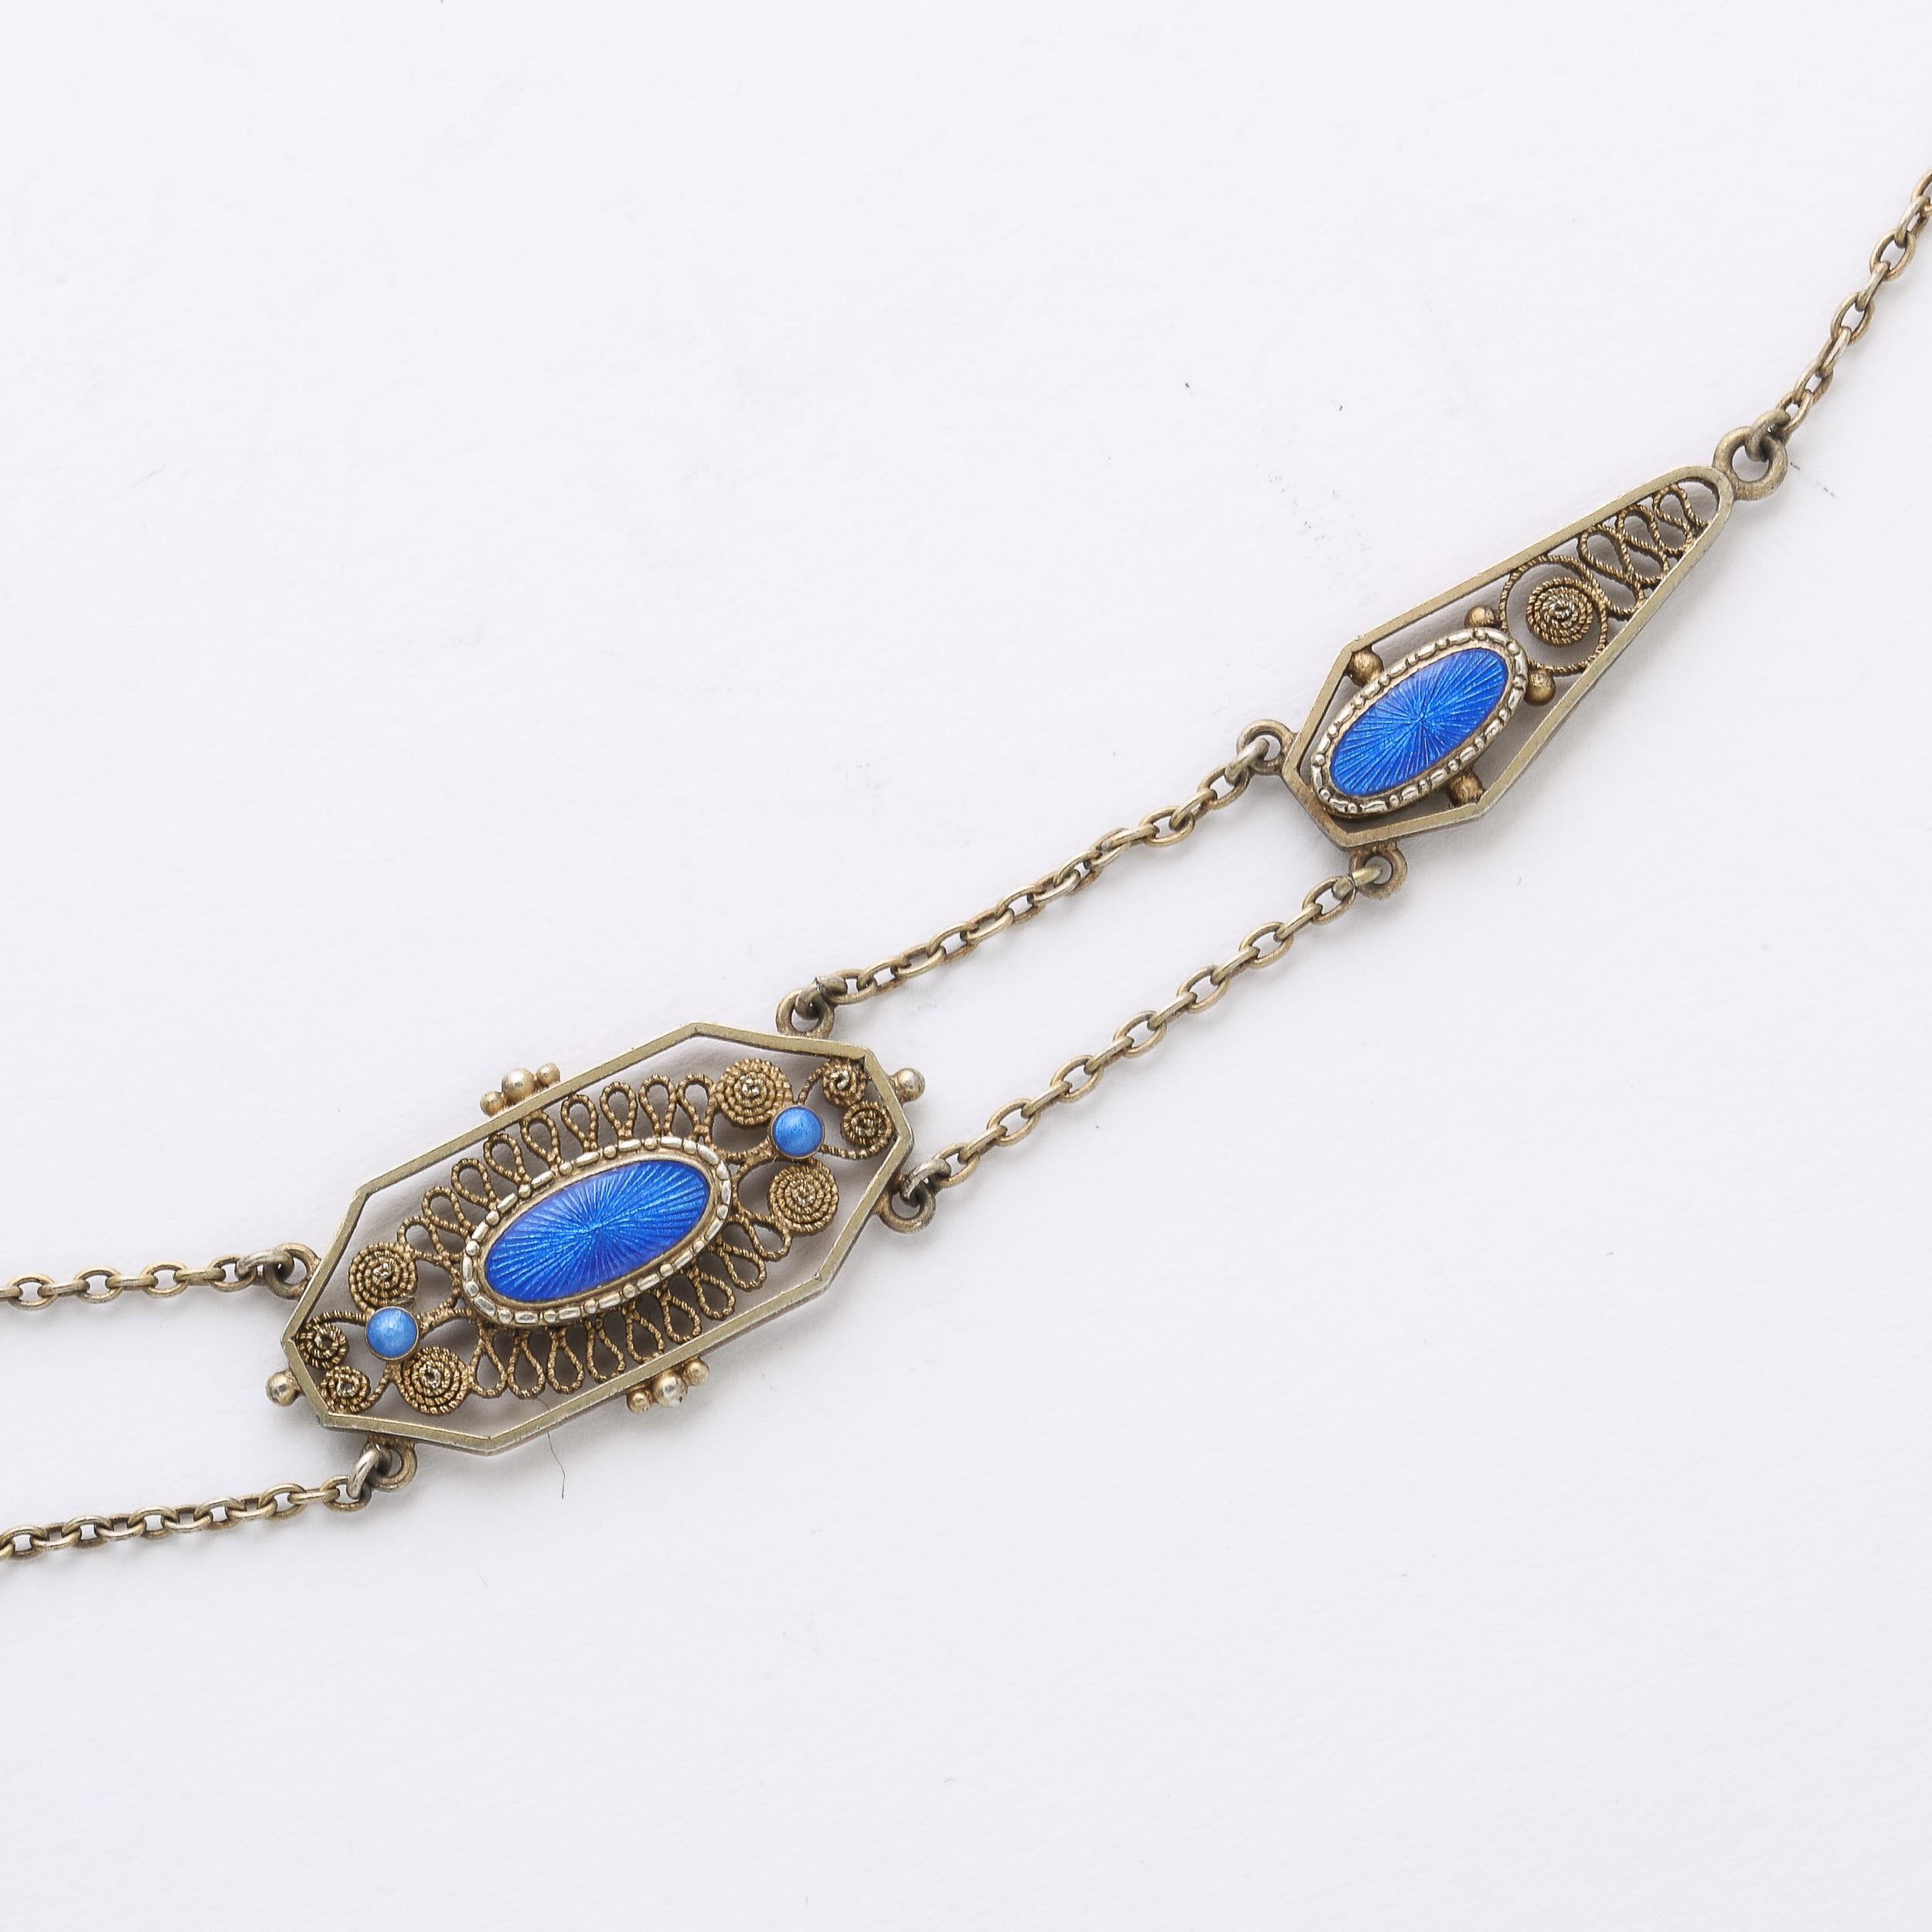 Women's Antique Silver Filigree Swag Style Necklace with Blue Guilloche Enamel Accents